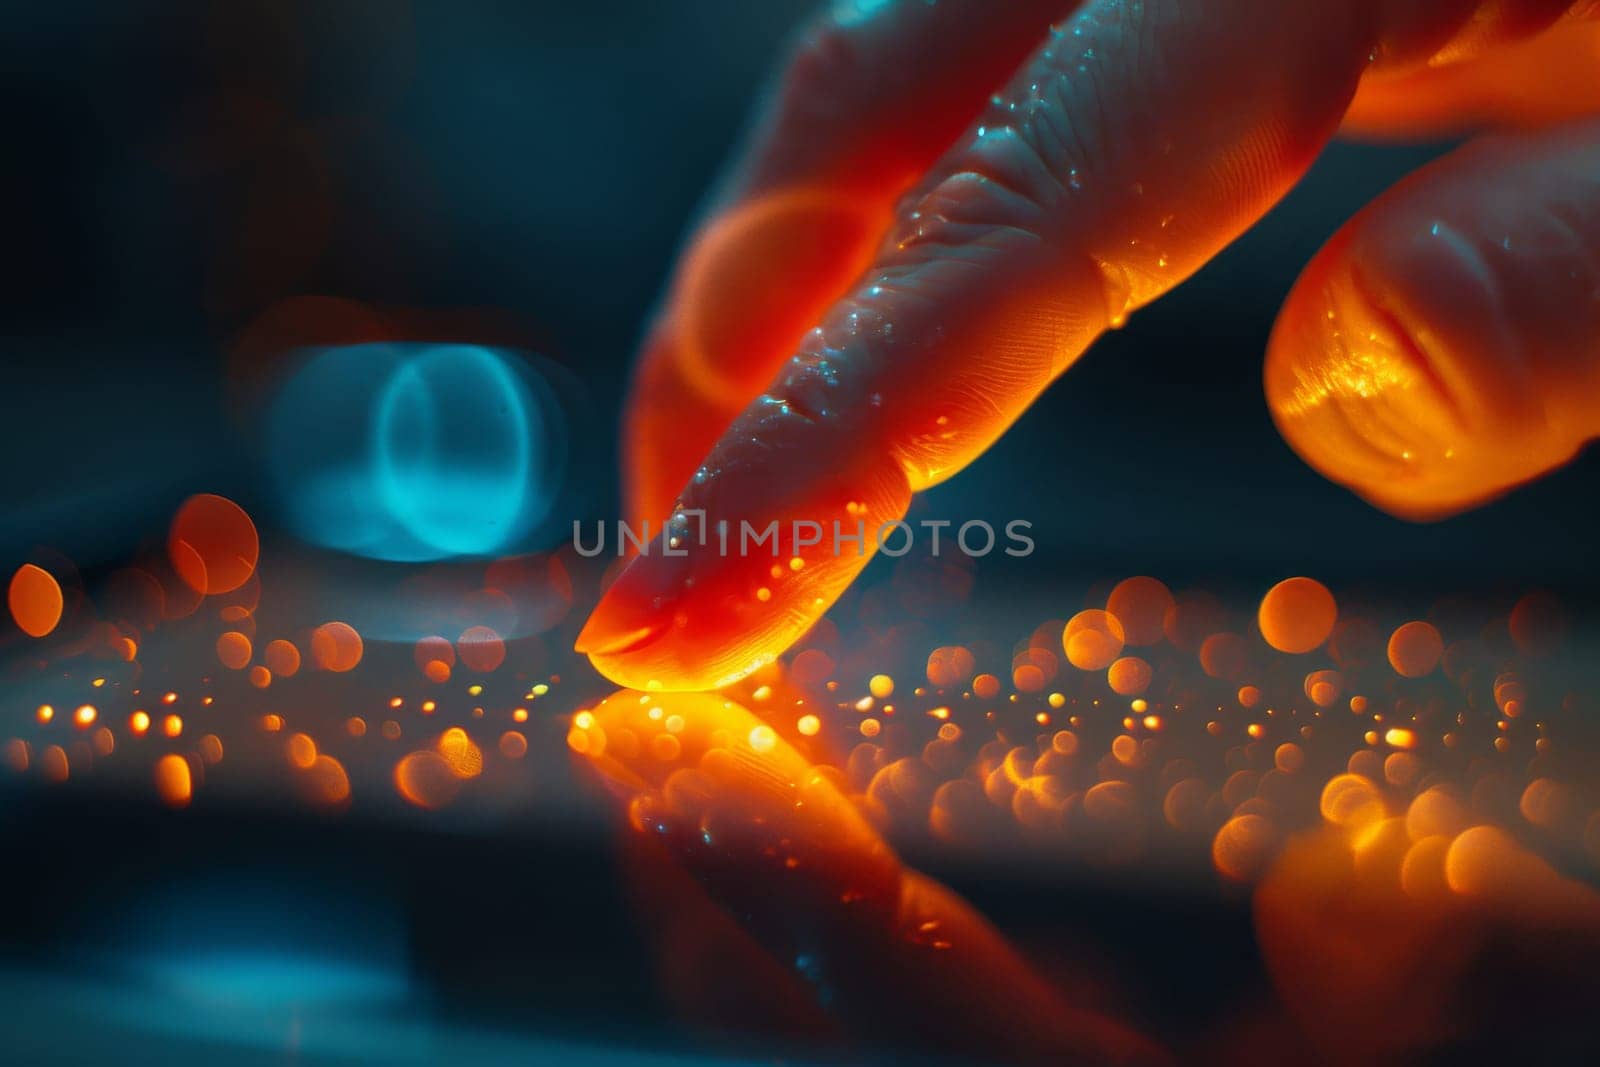 A hand is pointing at a screen with a blurry background. Concept of focus and attention, as the hand is drawn to the screen. The blurry background adds a sense of depth and movement to the scene